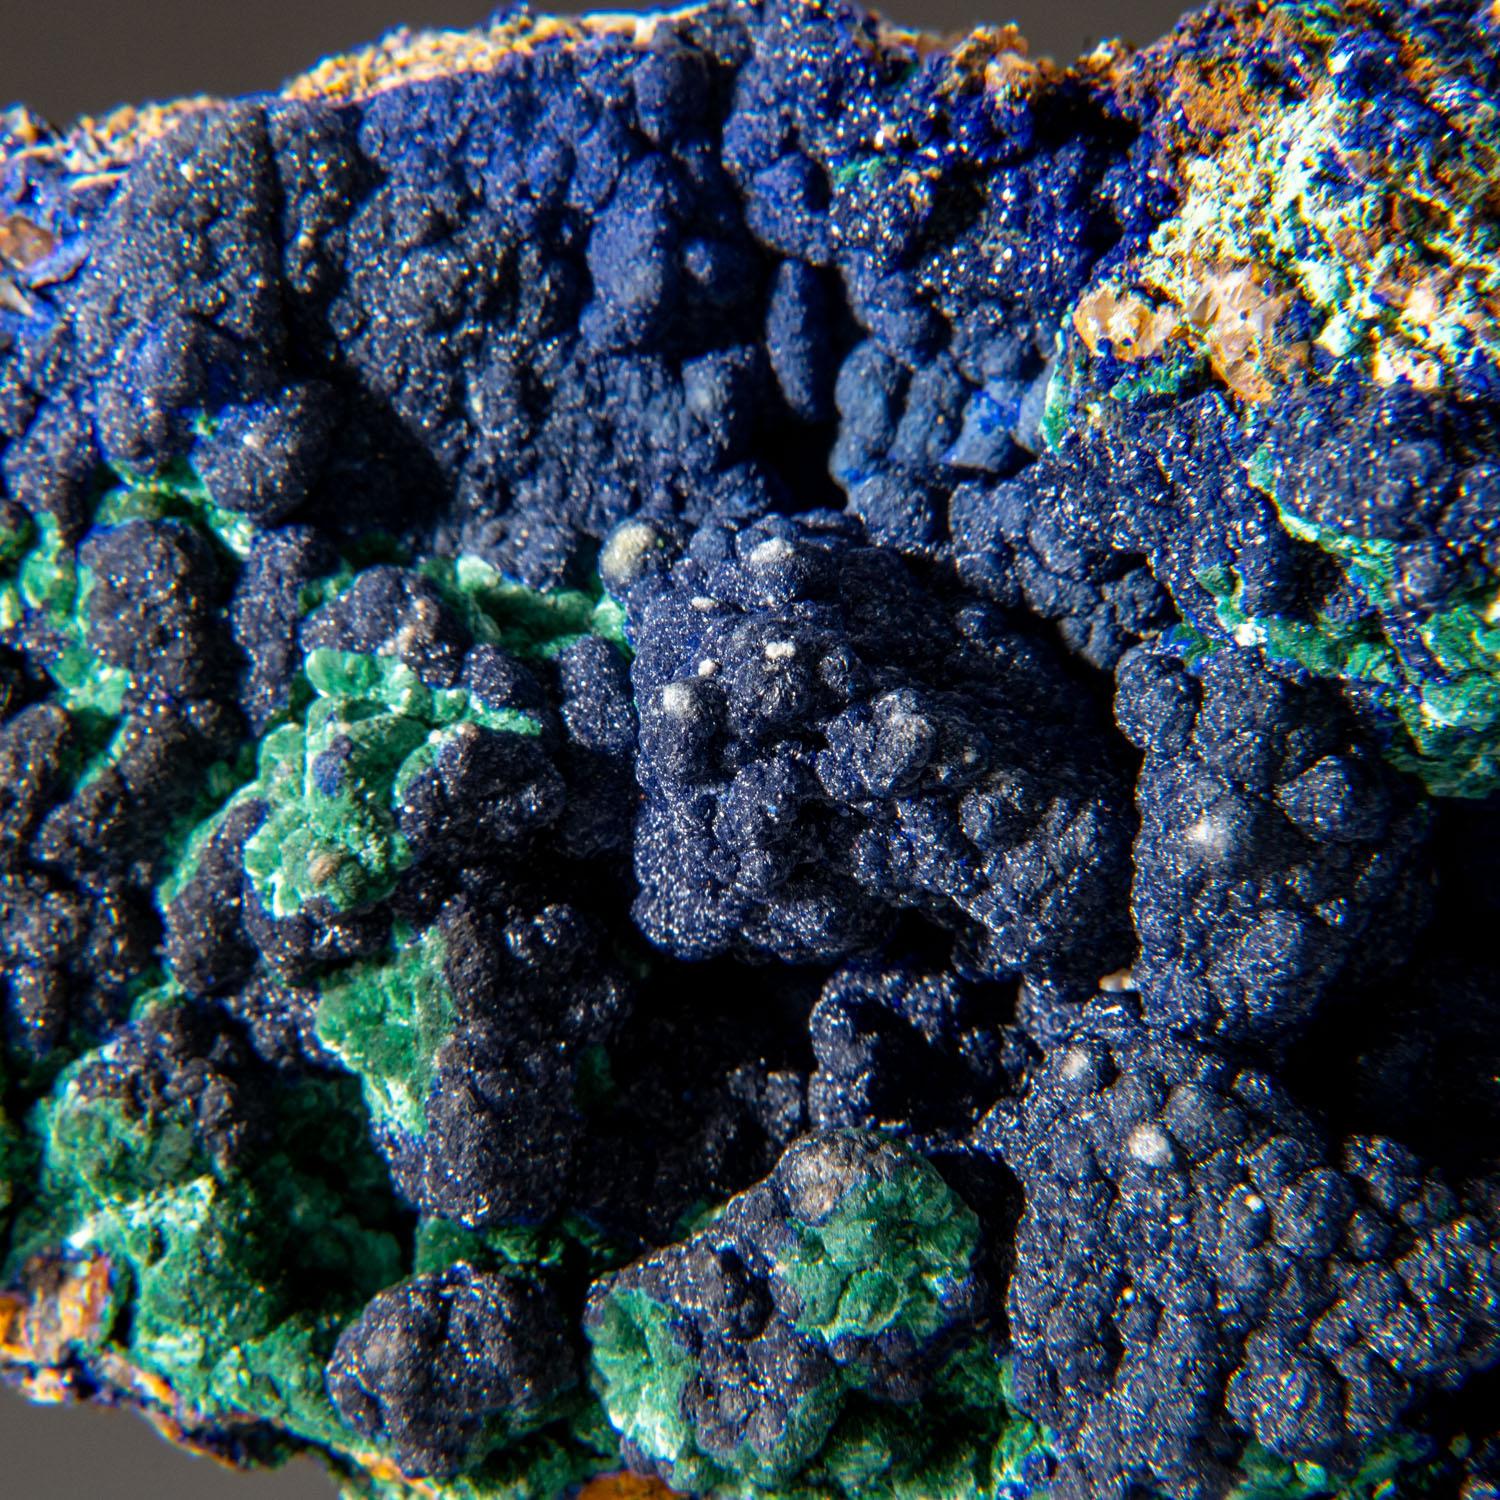 From Ahouli Mines, Aouli, 7 km northeast of Mibladen, Zeida-Aouli-Mibladen belt, Midelt Province, Morocco

Rich specimen of bright-blue lustrous azurite crystals on powdery green malachite microcrystals. The azurite is internally transparent making